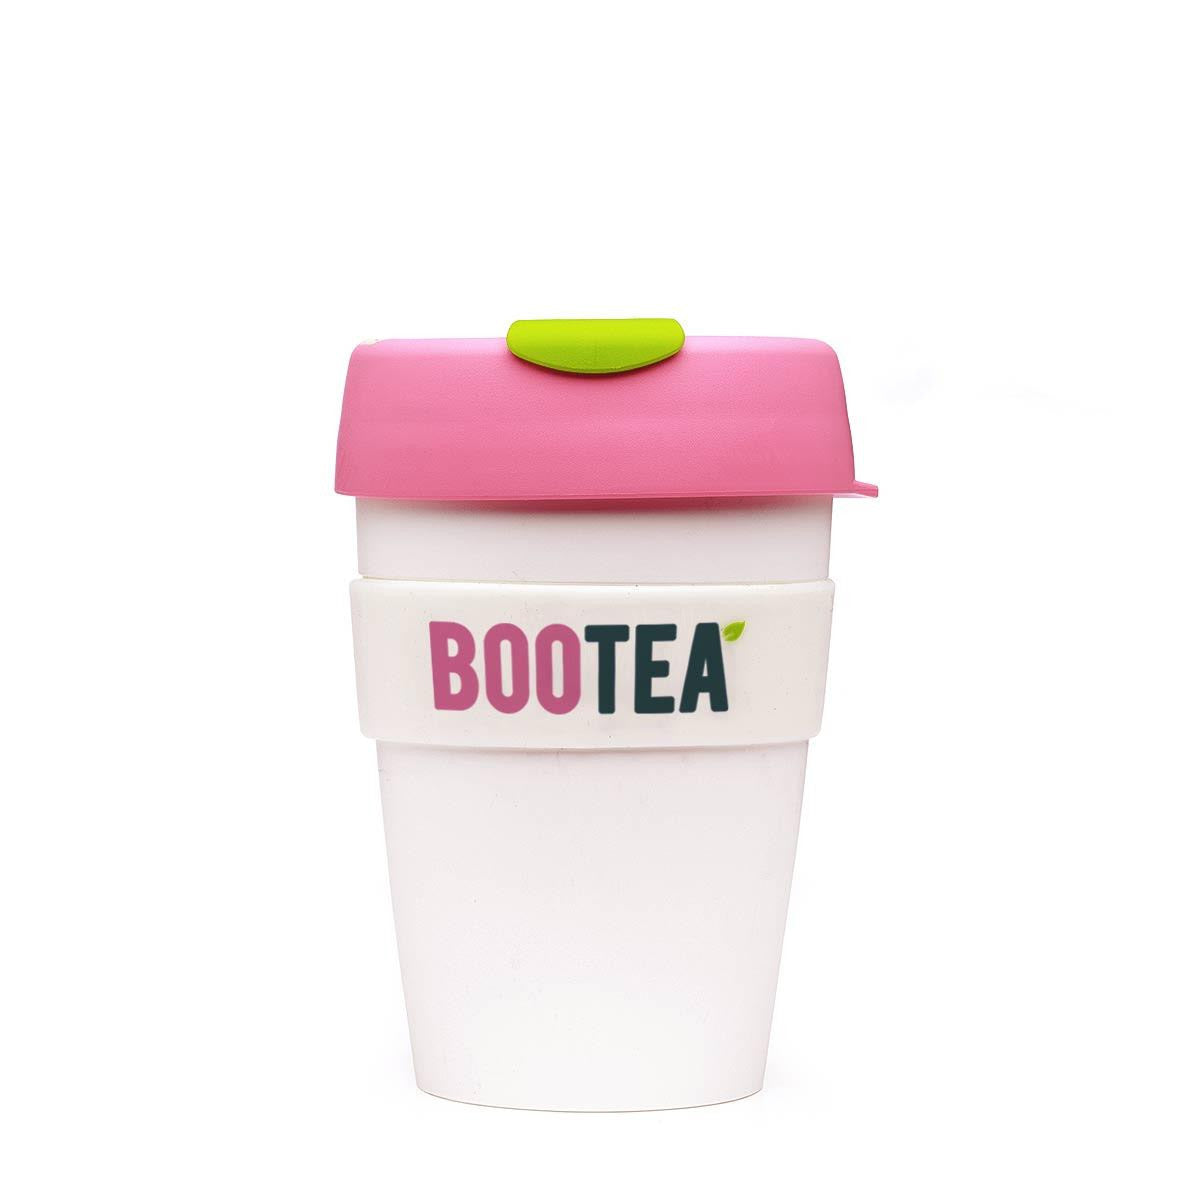 Bootea travel cup